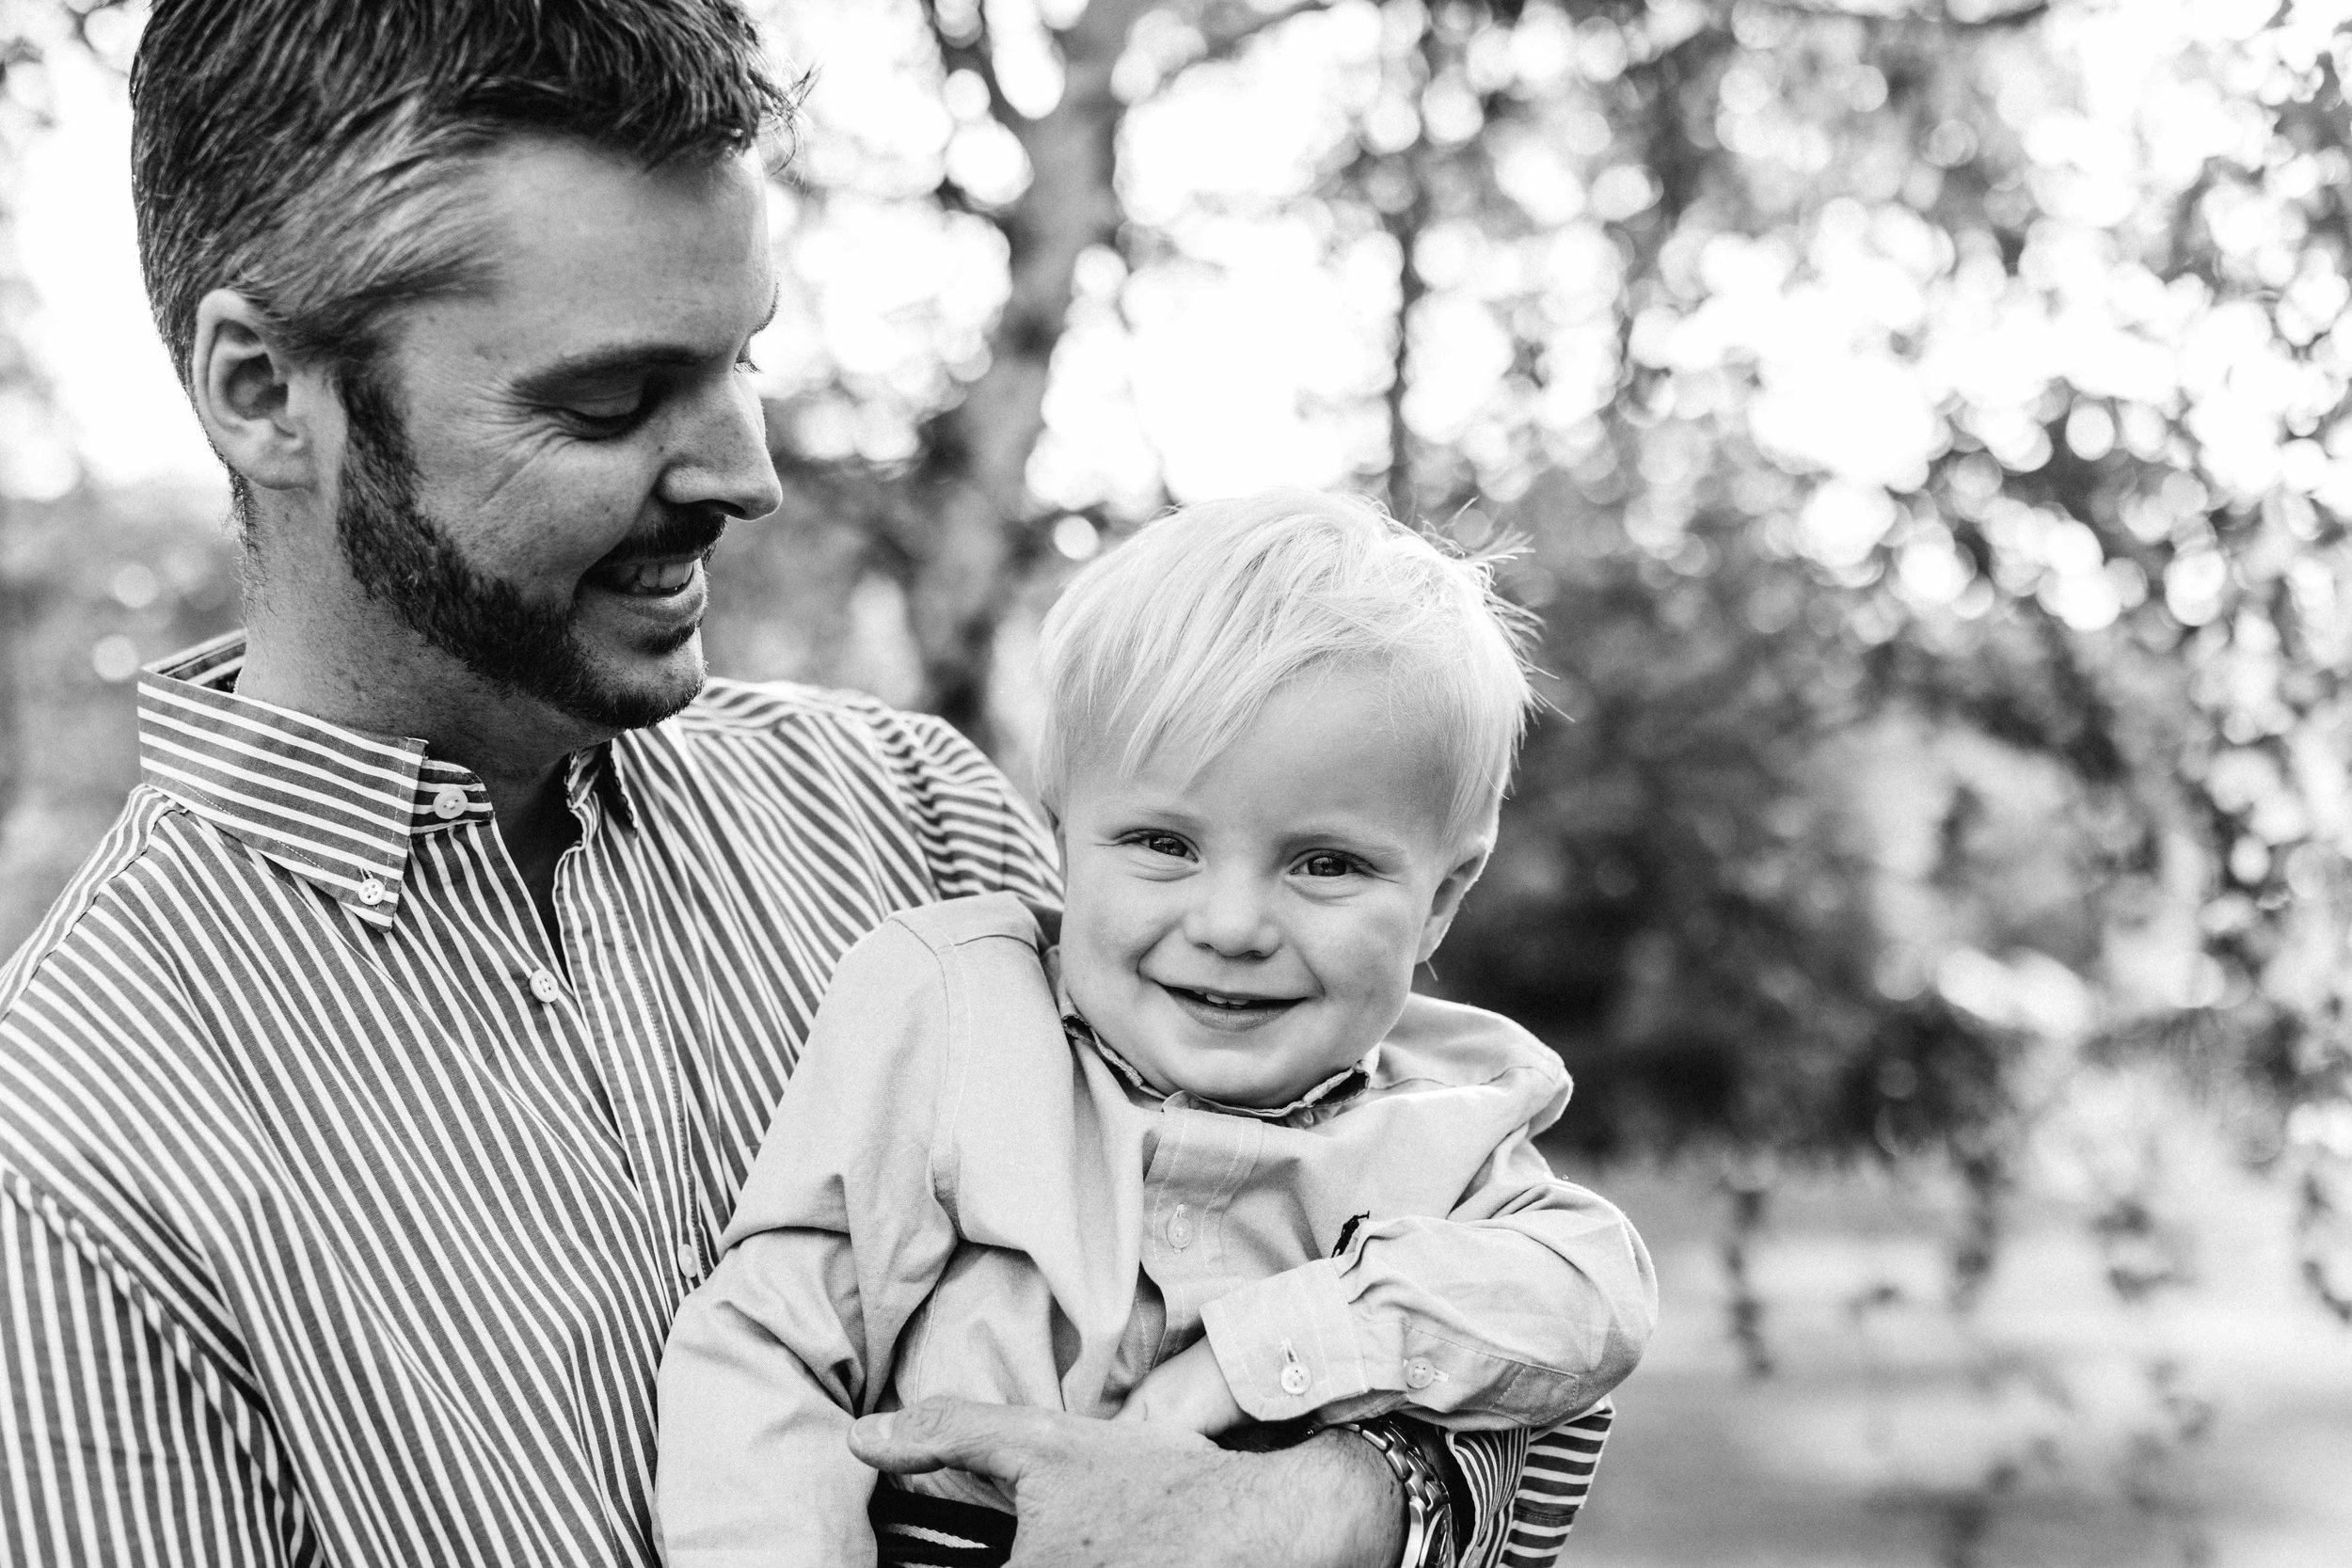 mittagong-bowral-southern-highlands-family-photography-www.emilyobrienphotography.net-lee-family-session-11.jpg